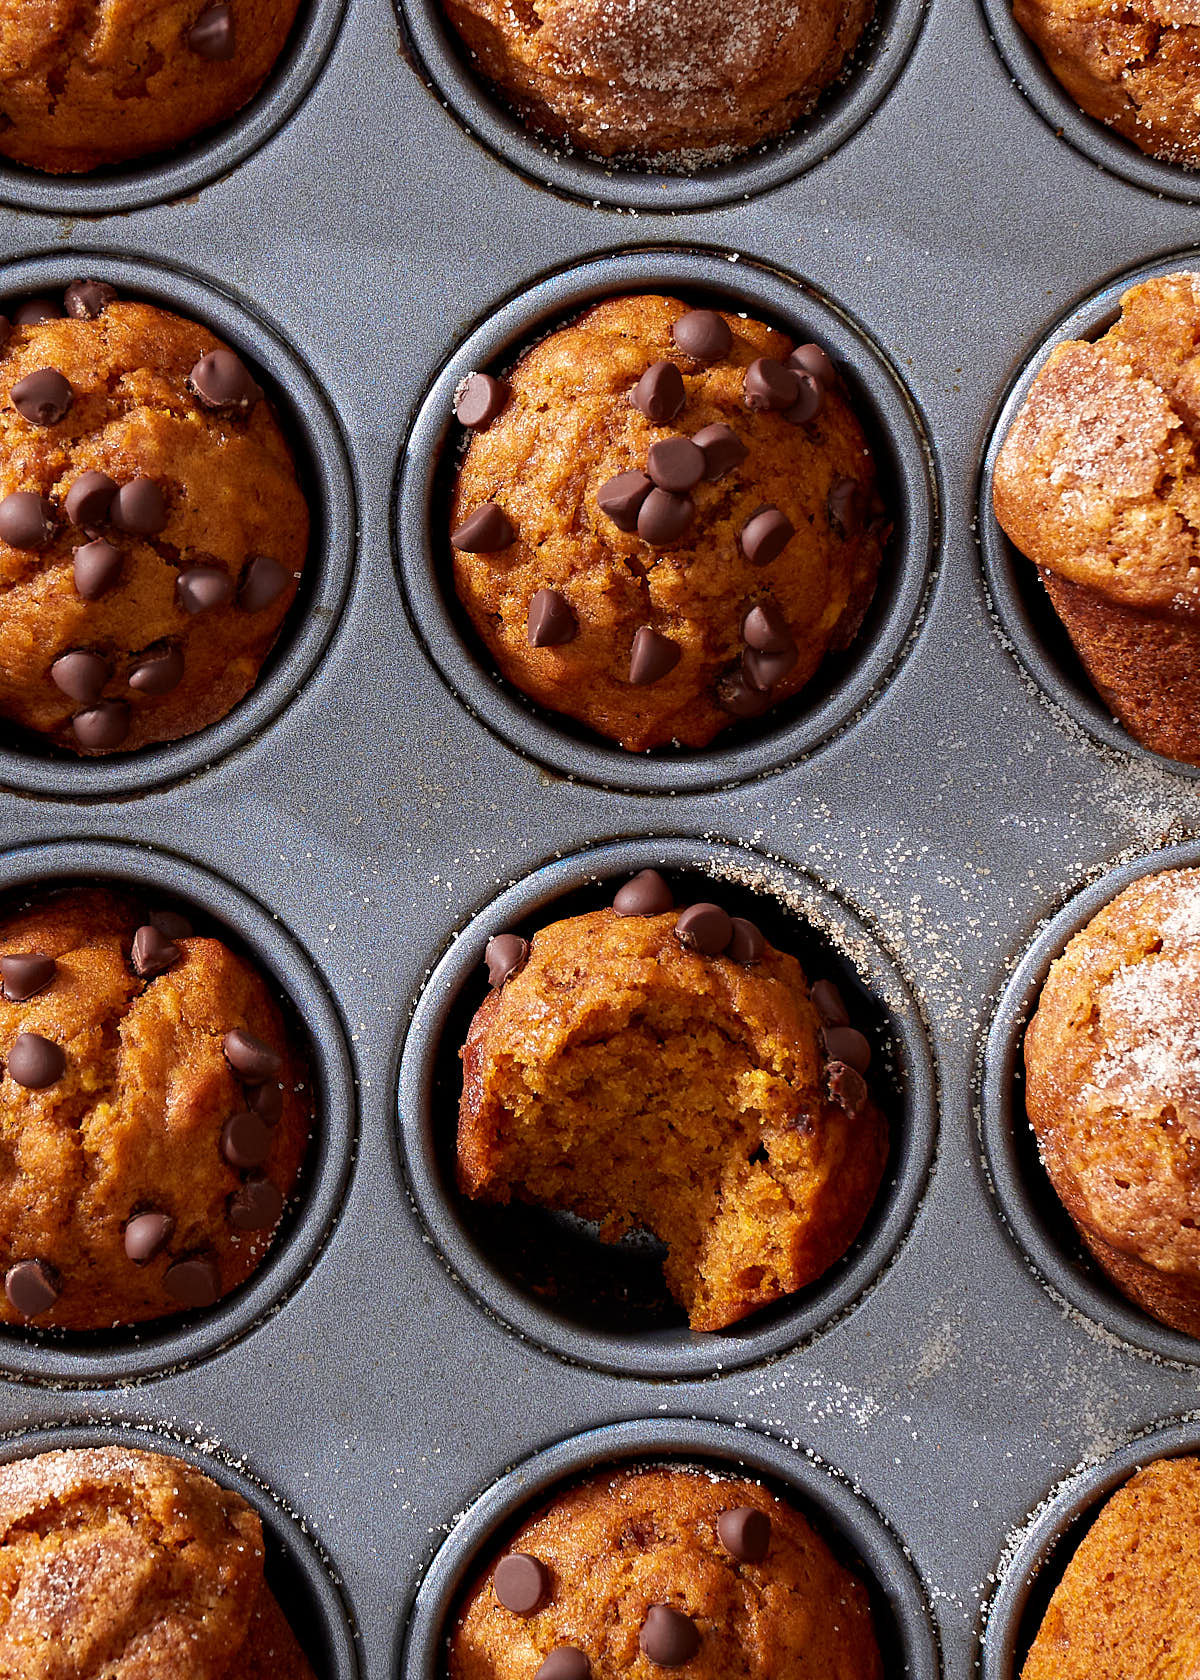 Mini pumpkin muffins, topped with cinnamon sugar and chocolate chips, in a muffin tin.